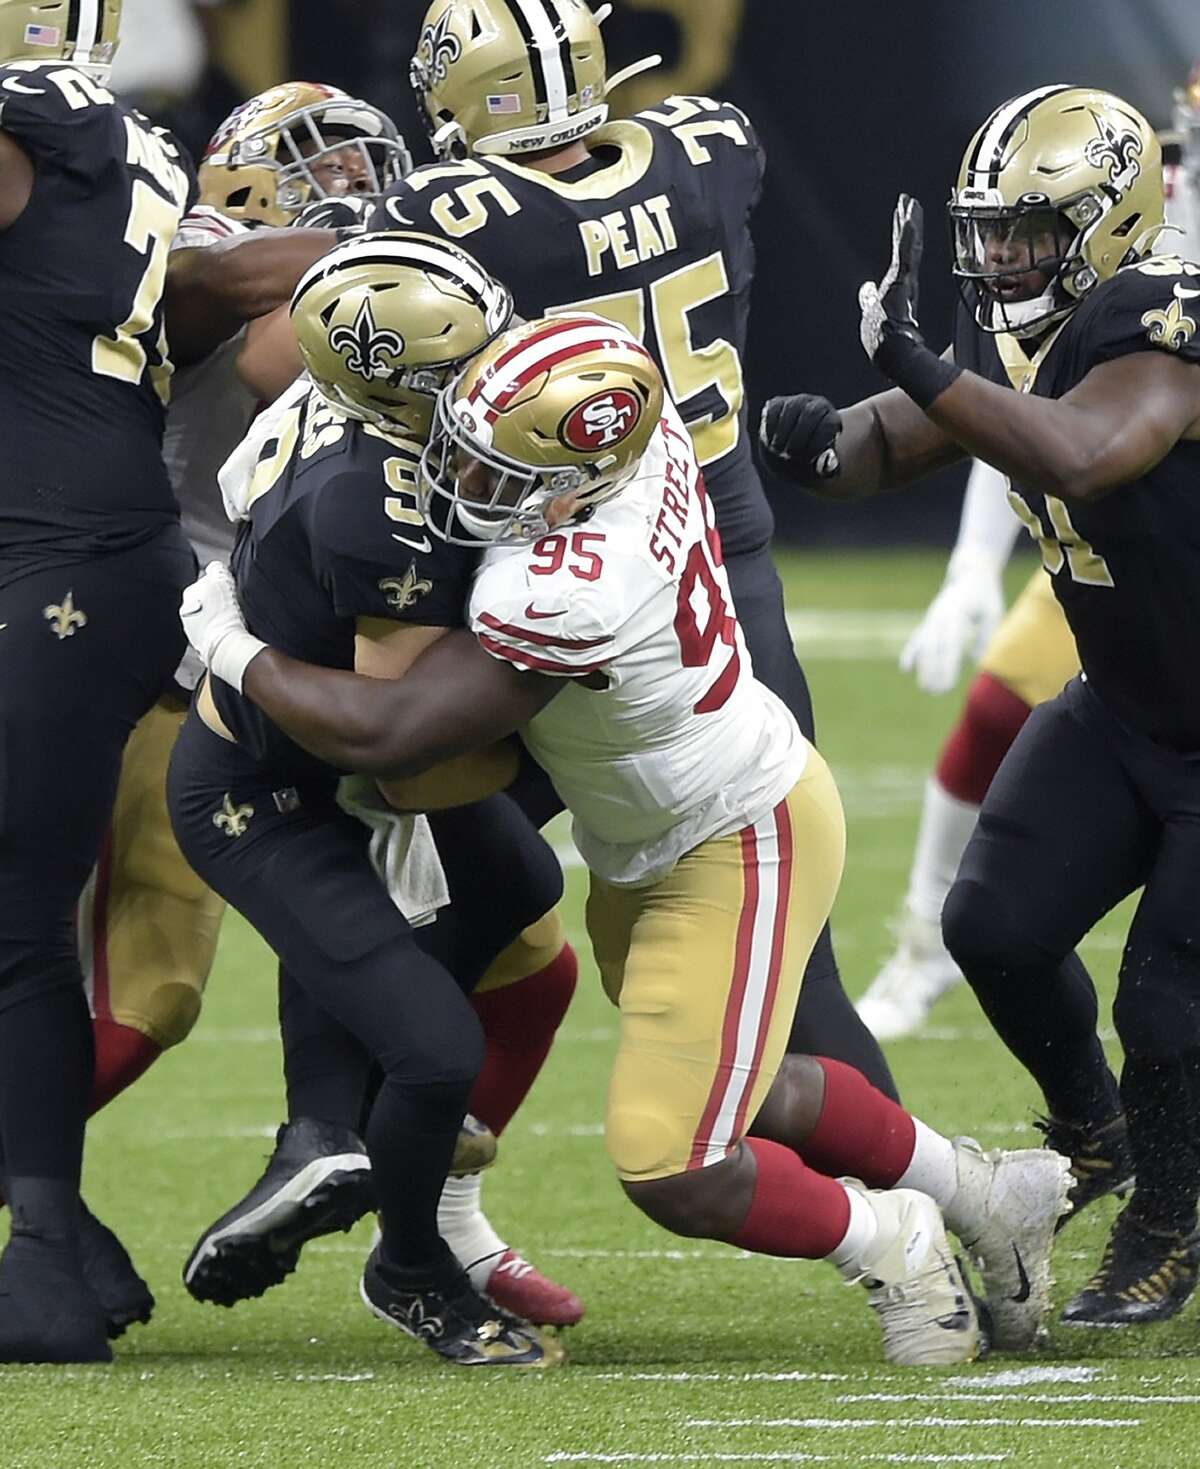 New Orleans Saints quarterback Drew Brees (9) is sacked by San Francisco 49ers' Kentavius Street (95) during the second quarter of an NFL football game in New Orleans, Sunday, Nov. 15, 2020. Brees has been diagnosed with multiple rib fractures and a collapsed right lung, a person with knowledge of the situation said Monday. The person spoke on condition of anonymity because the Saints have not announced specifics about Brees' injury, which the 41-year-old quarterback said occurred on a heavy hit by Street in the second quarter of New Orleans victory over the Niners on Sunday.